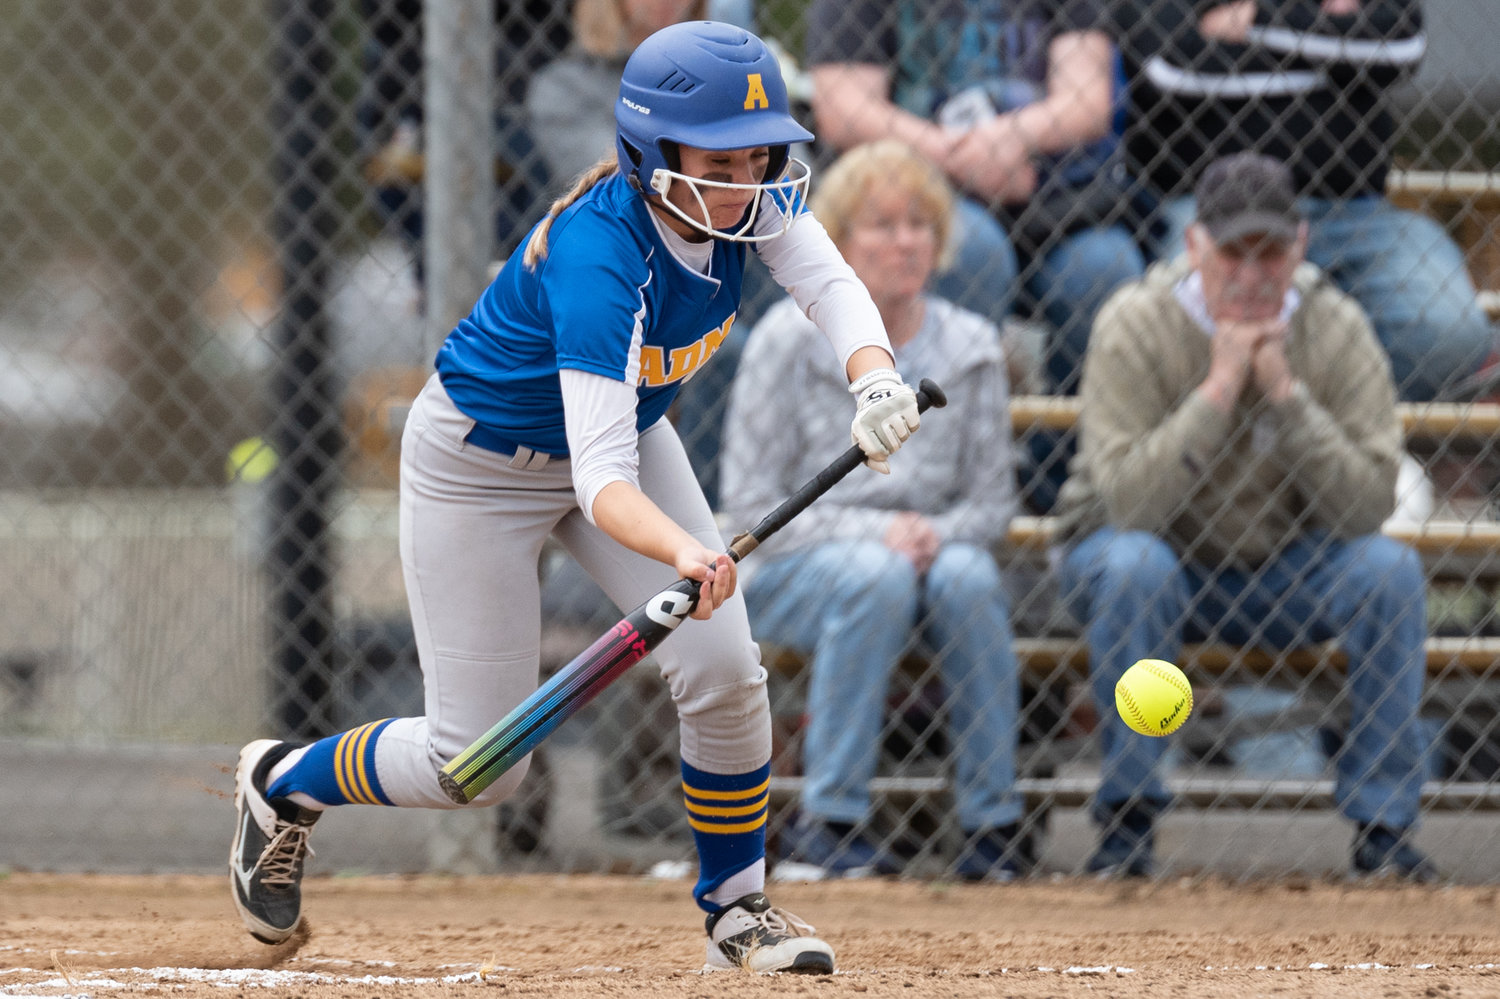 Adna's Gracie Beaulieu lays down a bunt against Toutle Lake in the 2B District 4 tournament at Fort Borst Park May 20.